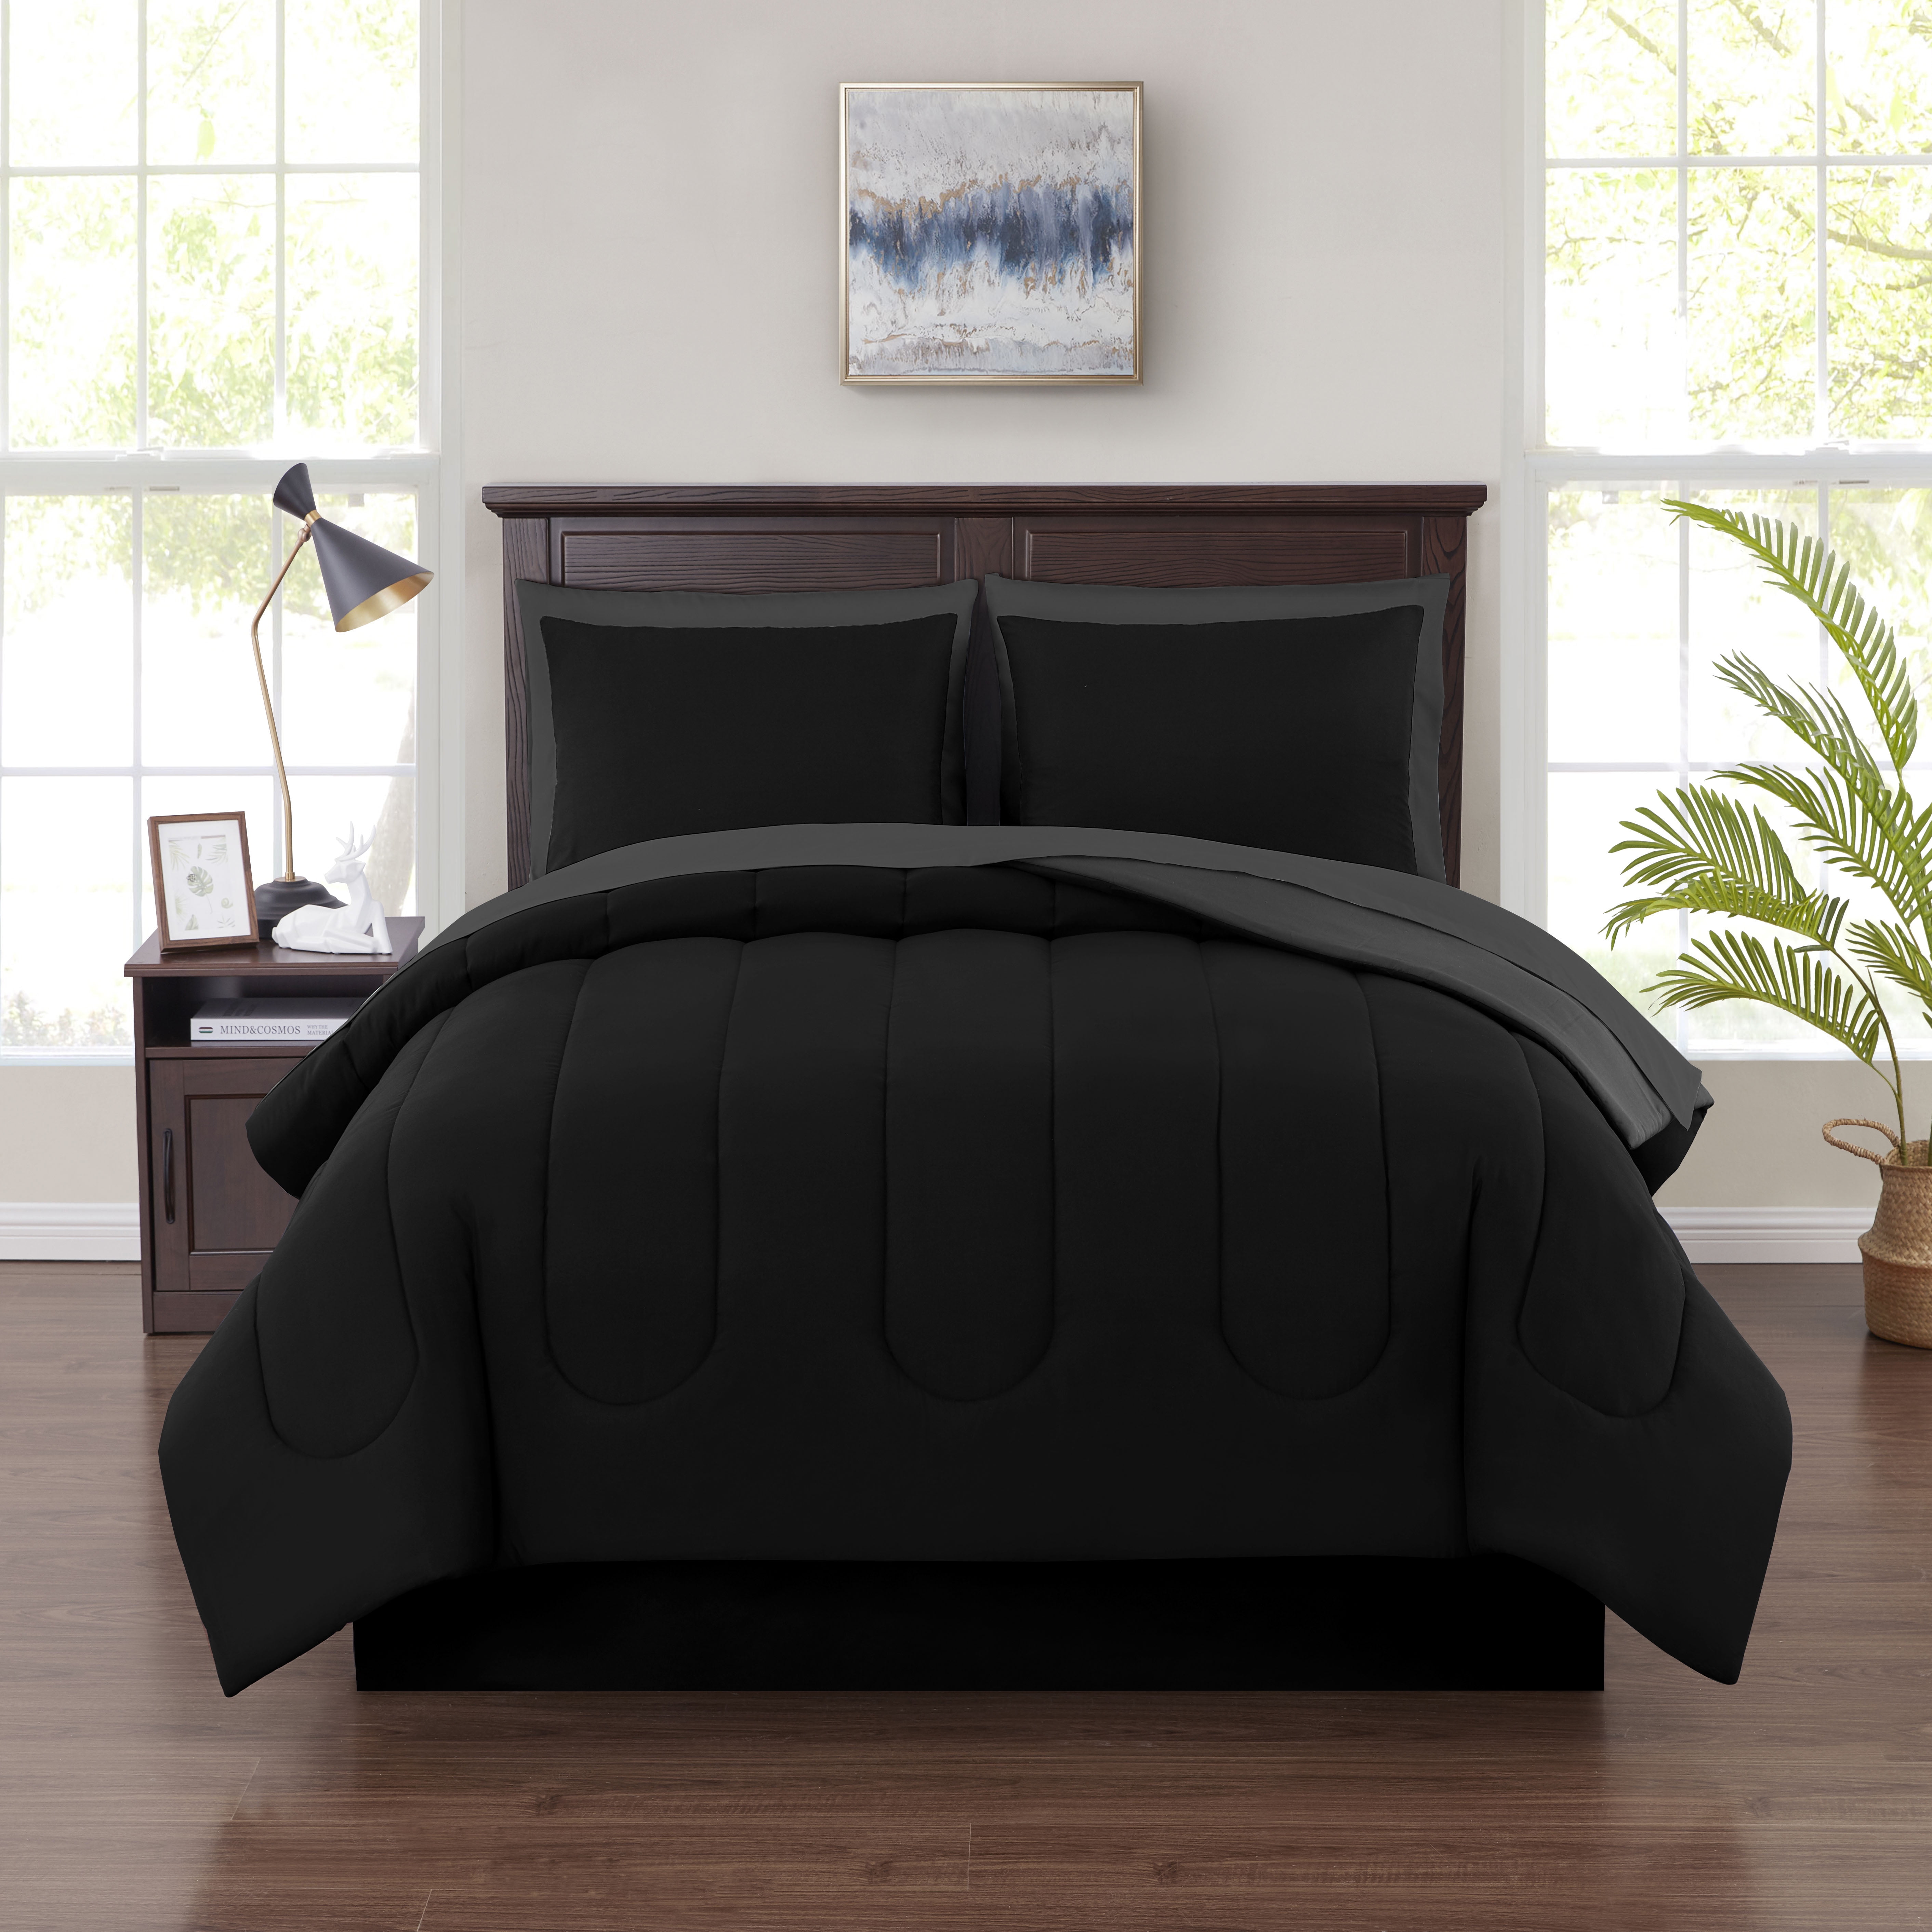 Mainstays 6 Piece Black Bed In A Bag, Gray Twin Bed Set